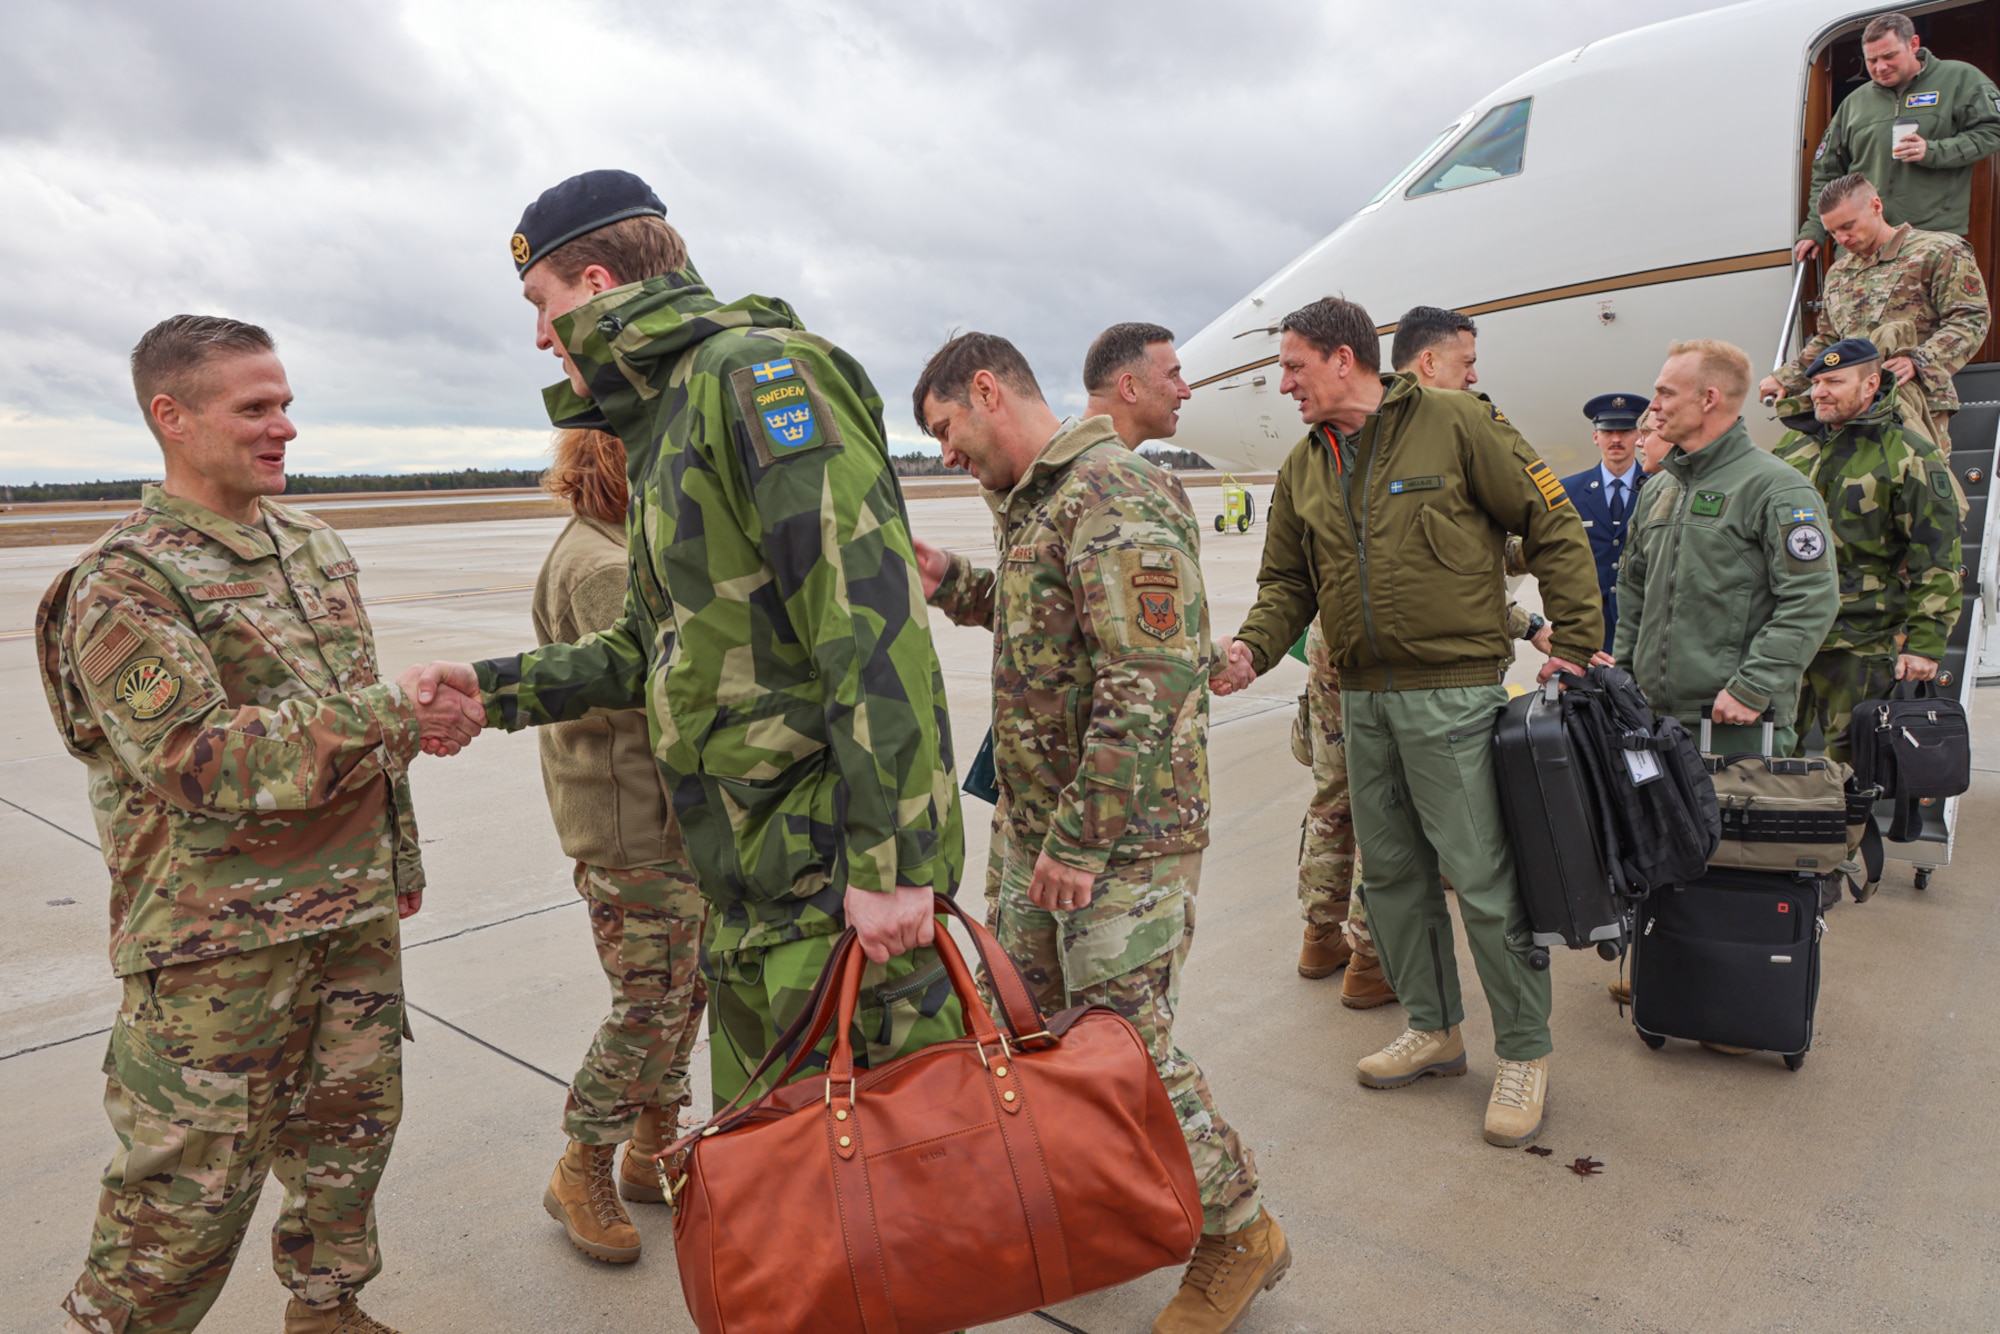 Members of Headquarters Air Force (HAF) and Swedish Air Force are greeted by leadership from the Michigan National Guard (MING) at the Alpena Combat Readiness Training Center, Michigan, on April 3rd, 2024. The Michigan National Guard hosted members of Headquarters Air Force and Swedish Air Force at the National All Domain Warfighting Center (NADWC) on April 3-4, 2024. The visit gave those attending a look at training venues and opportunities offered at the NADWC in Michigan. (U.S. Air National Guard photo by Tech. Sgt. Drew Schumann)